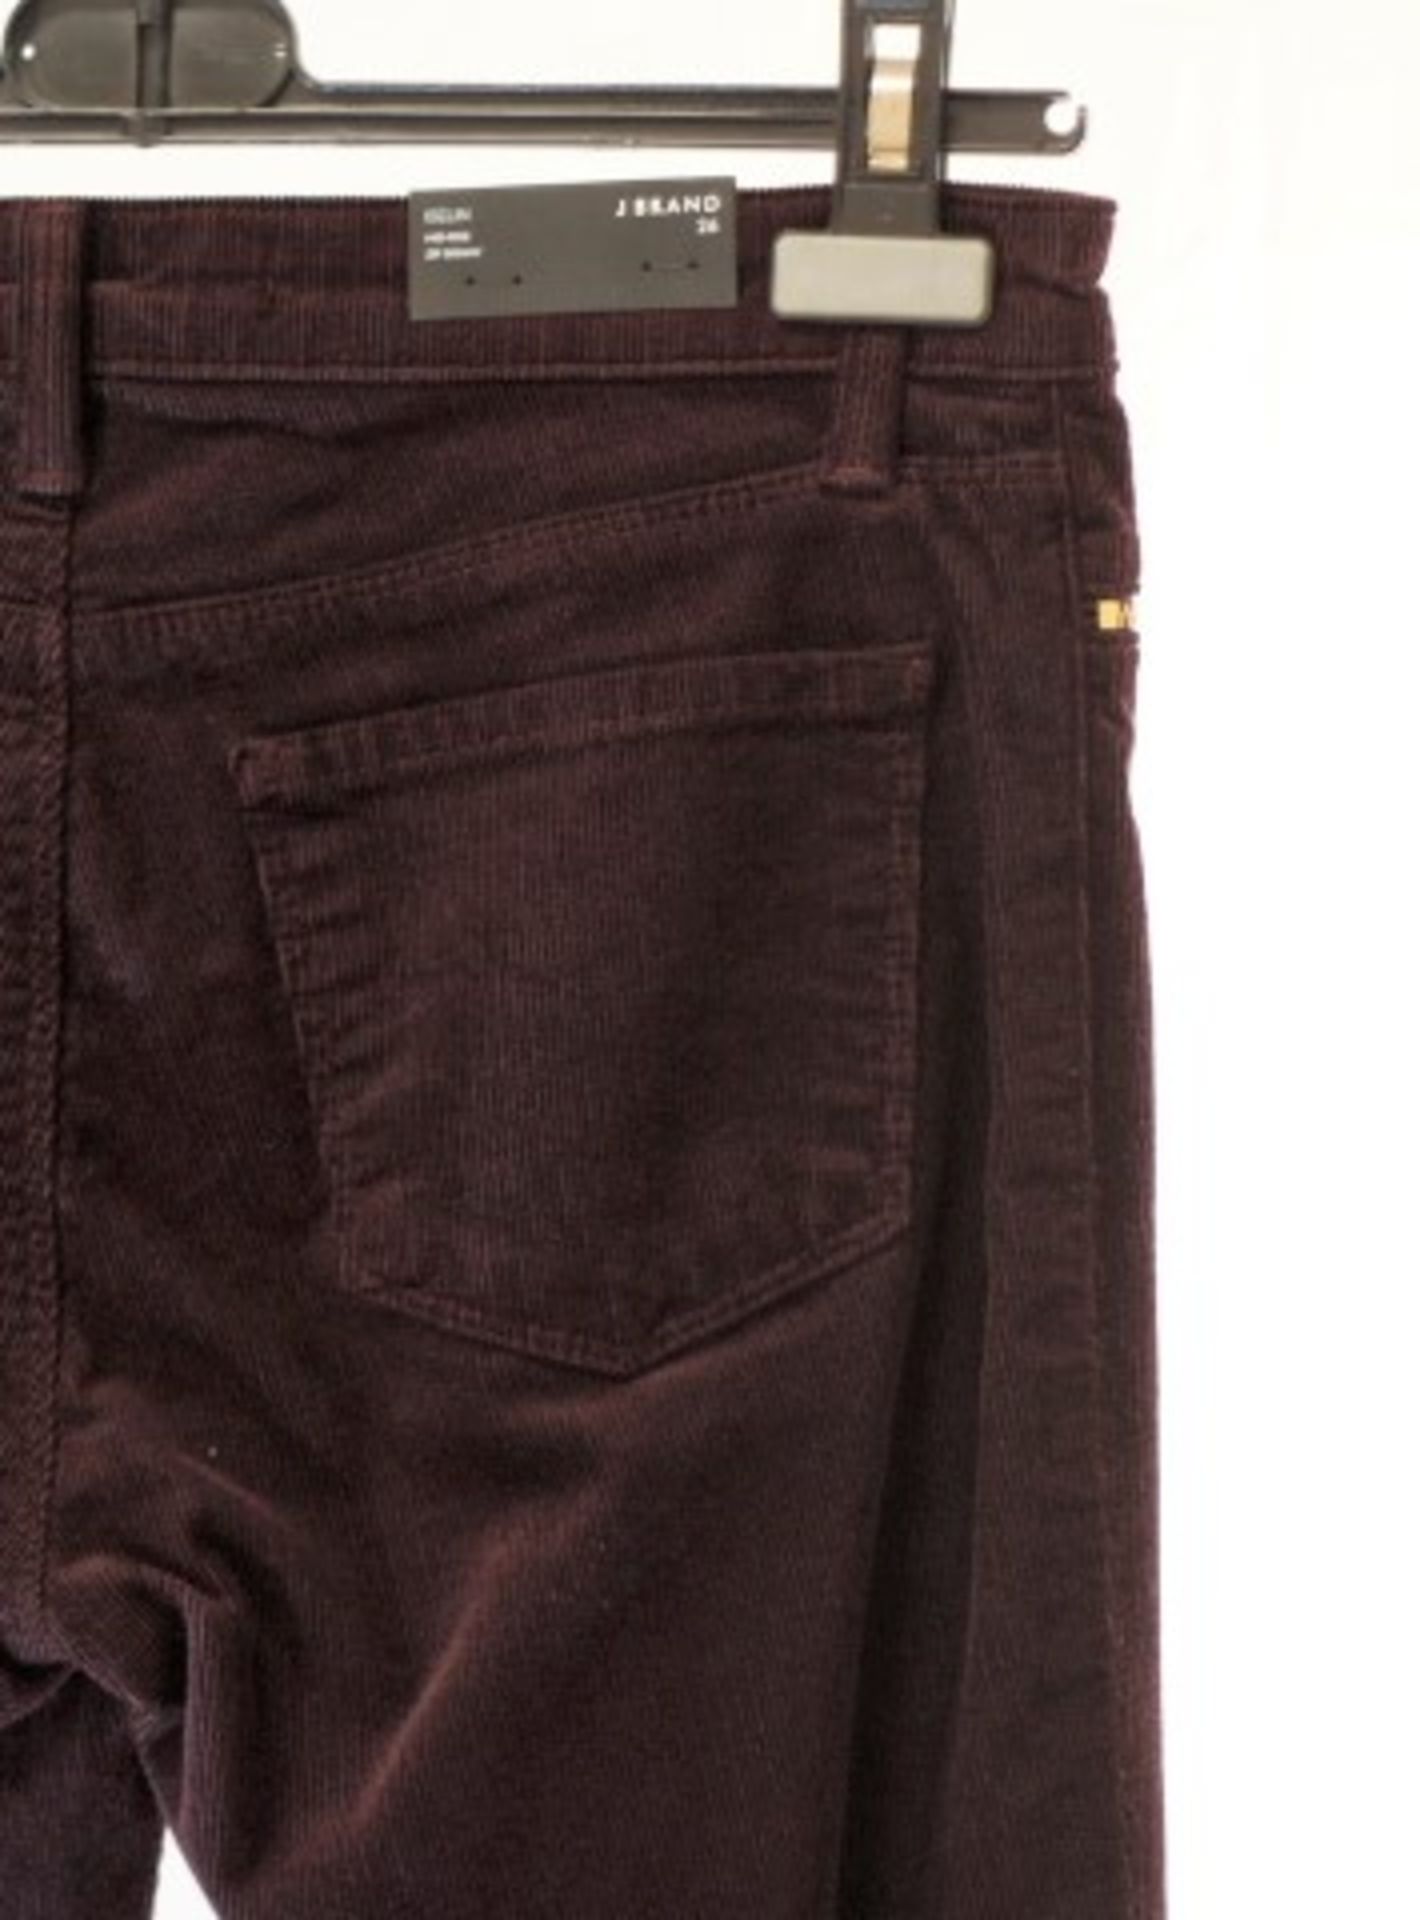 1 x J Brand Blackberry Corduroy Jeans - Size: 8 - Material: 56% Cotton, 37% Modal, 6% Polyester, - Image 2 of 6